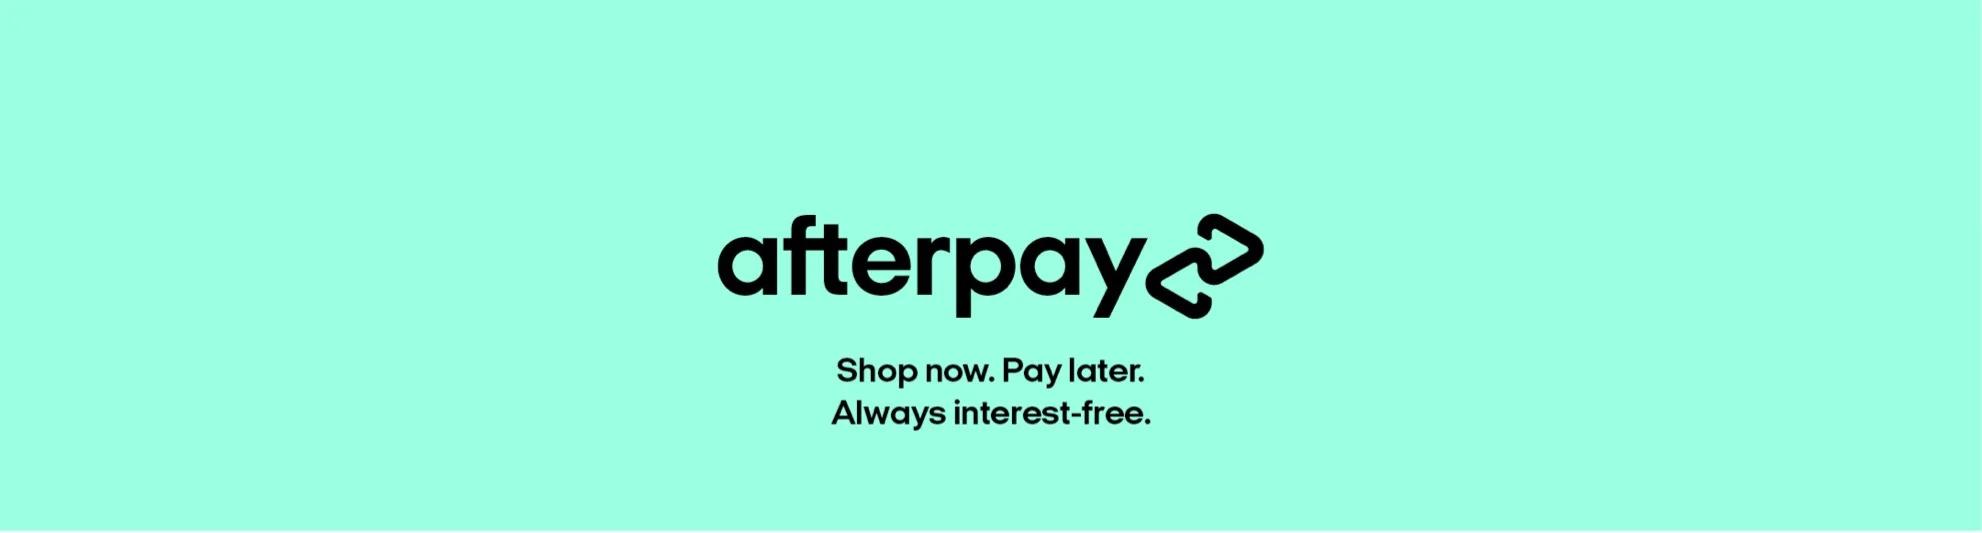 UO Afterpay XL 1